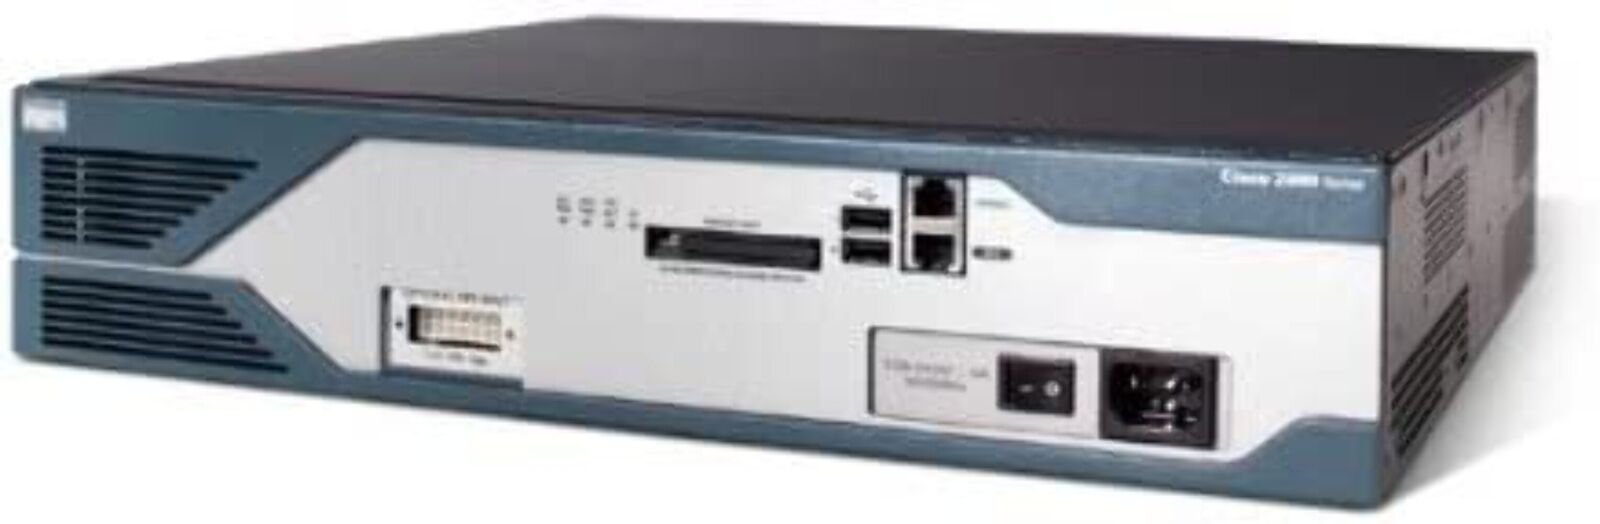 Cisco 2821 Integrated Services Router Security Bundle, 64 MB Flash / 256 MB DRAM